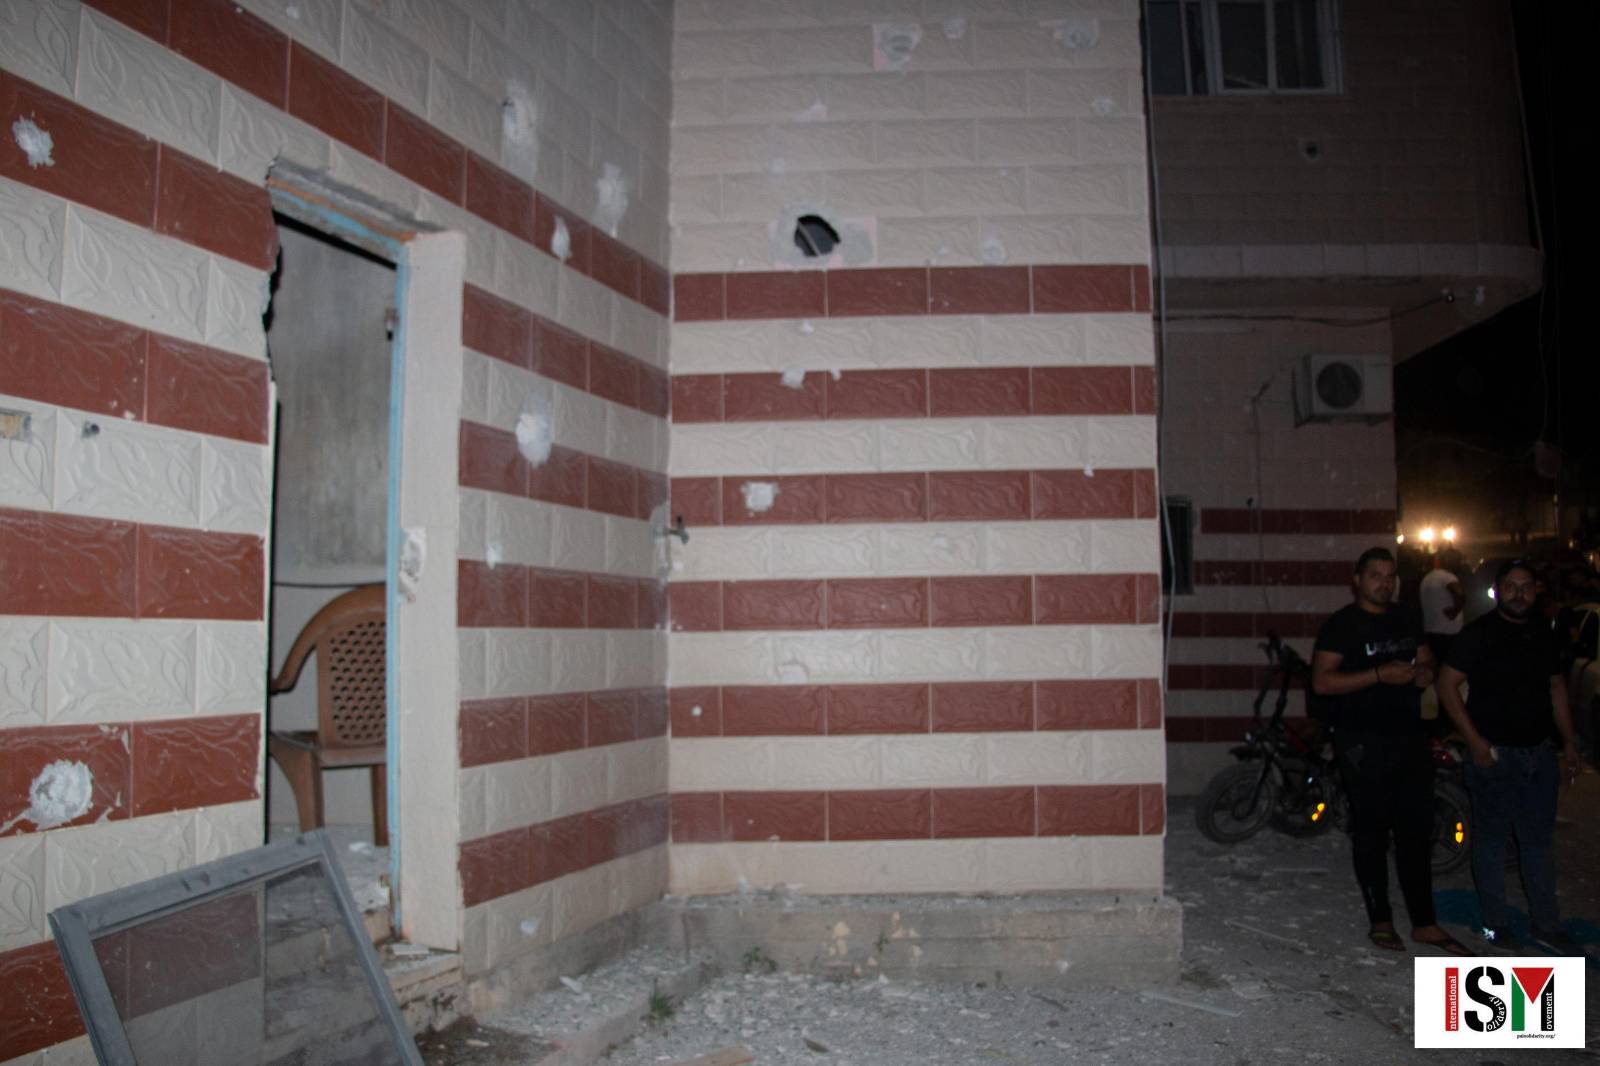 Damage caused by the Iron Dome missile in Beqa Al Sharqiya